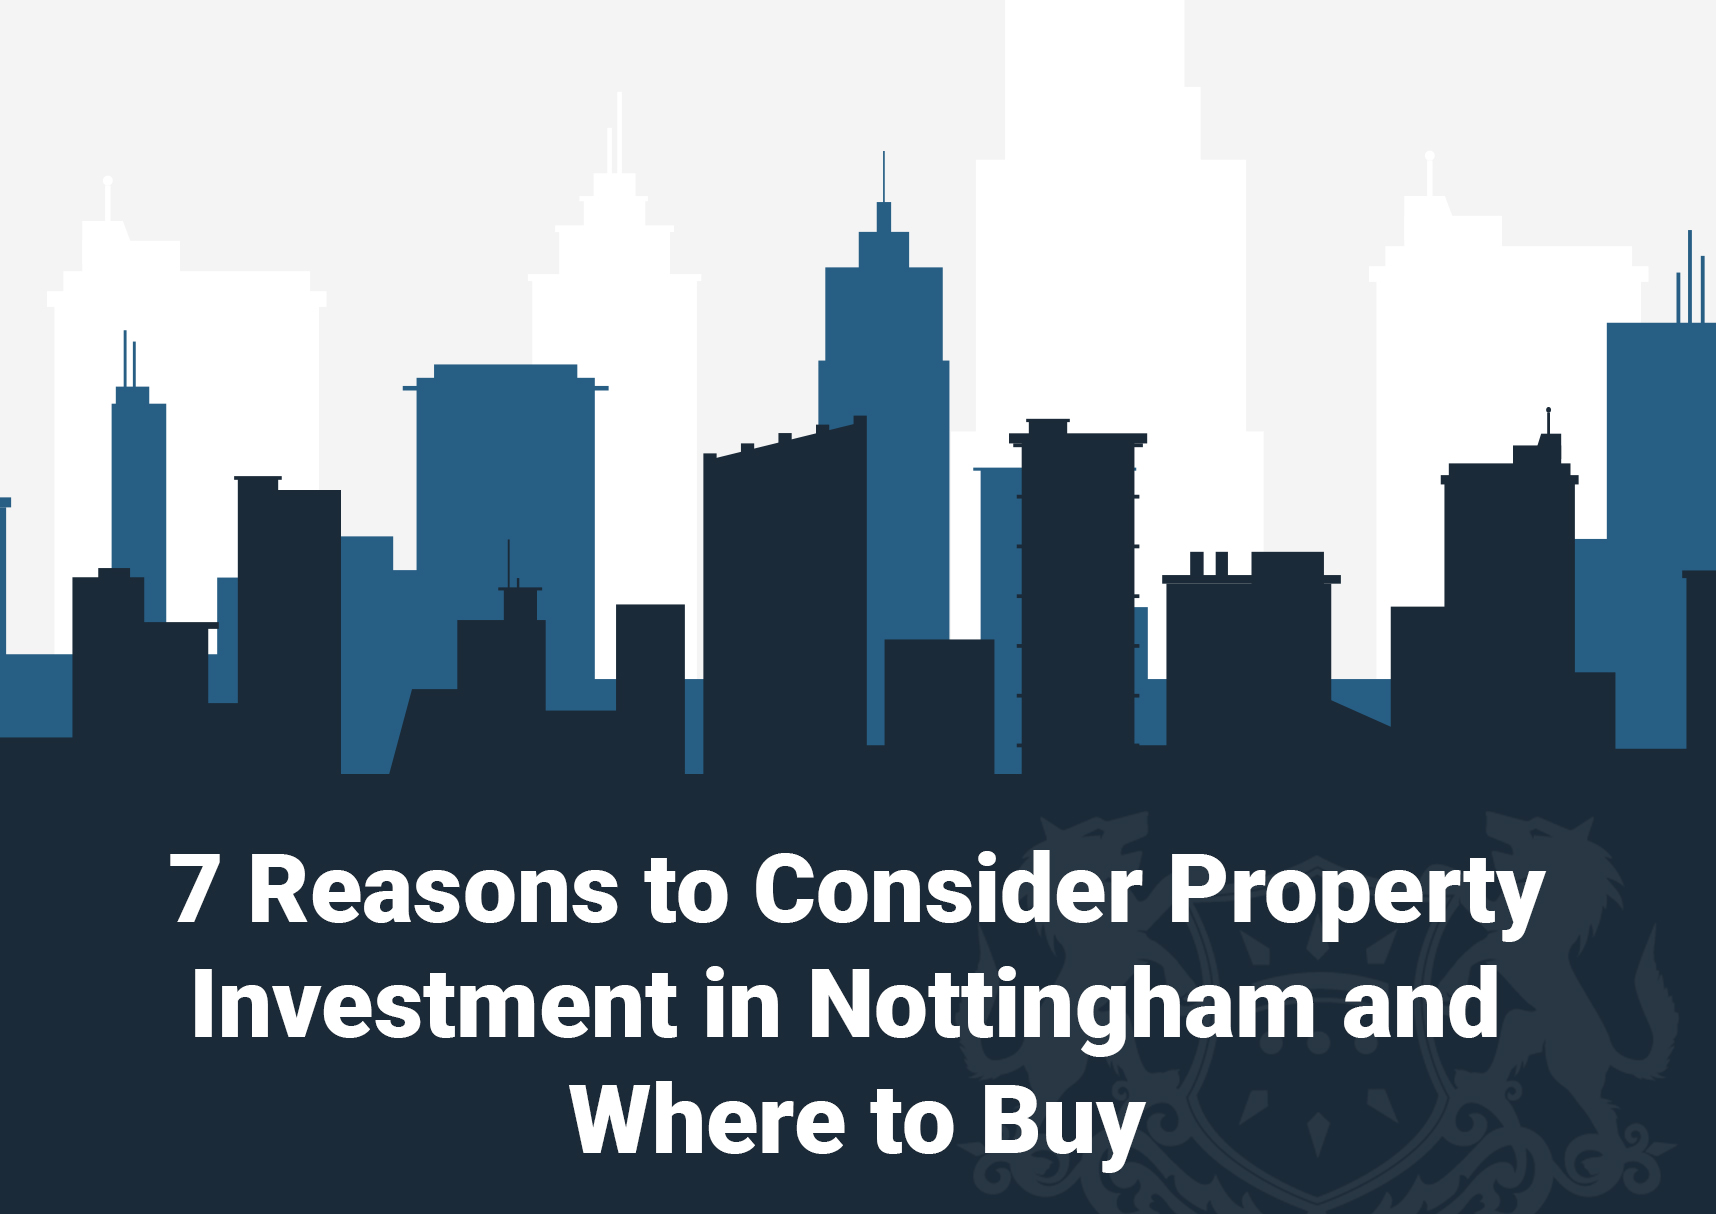 7 Reasons to Invest in Property in Nottingham and Where to Buy